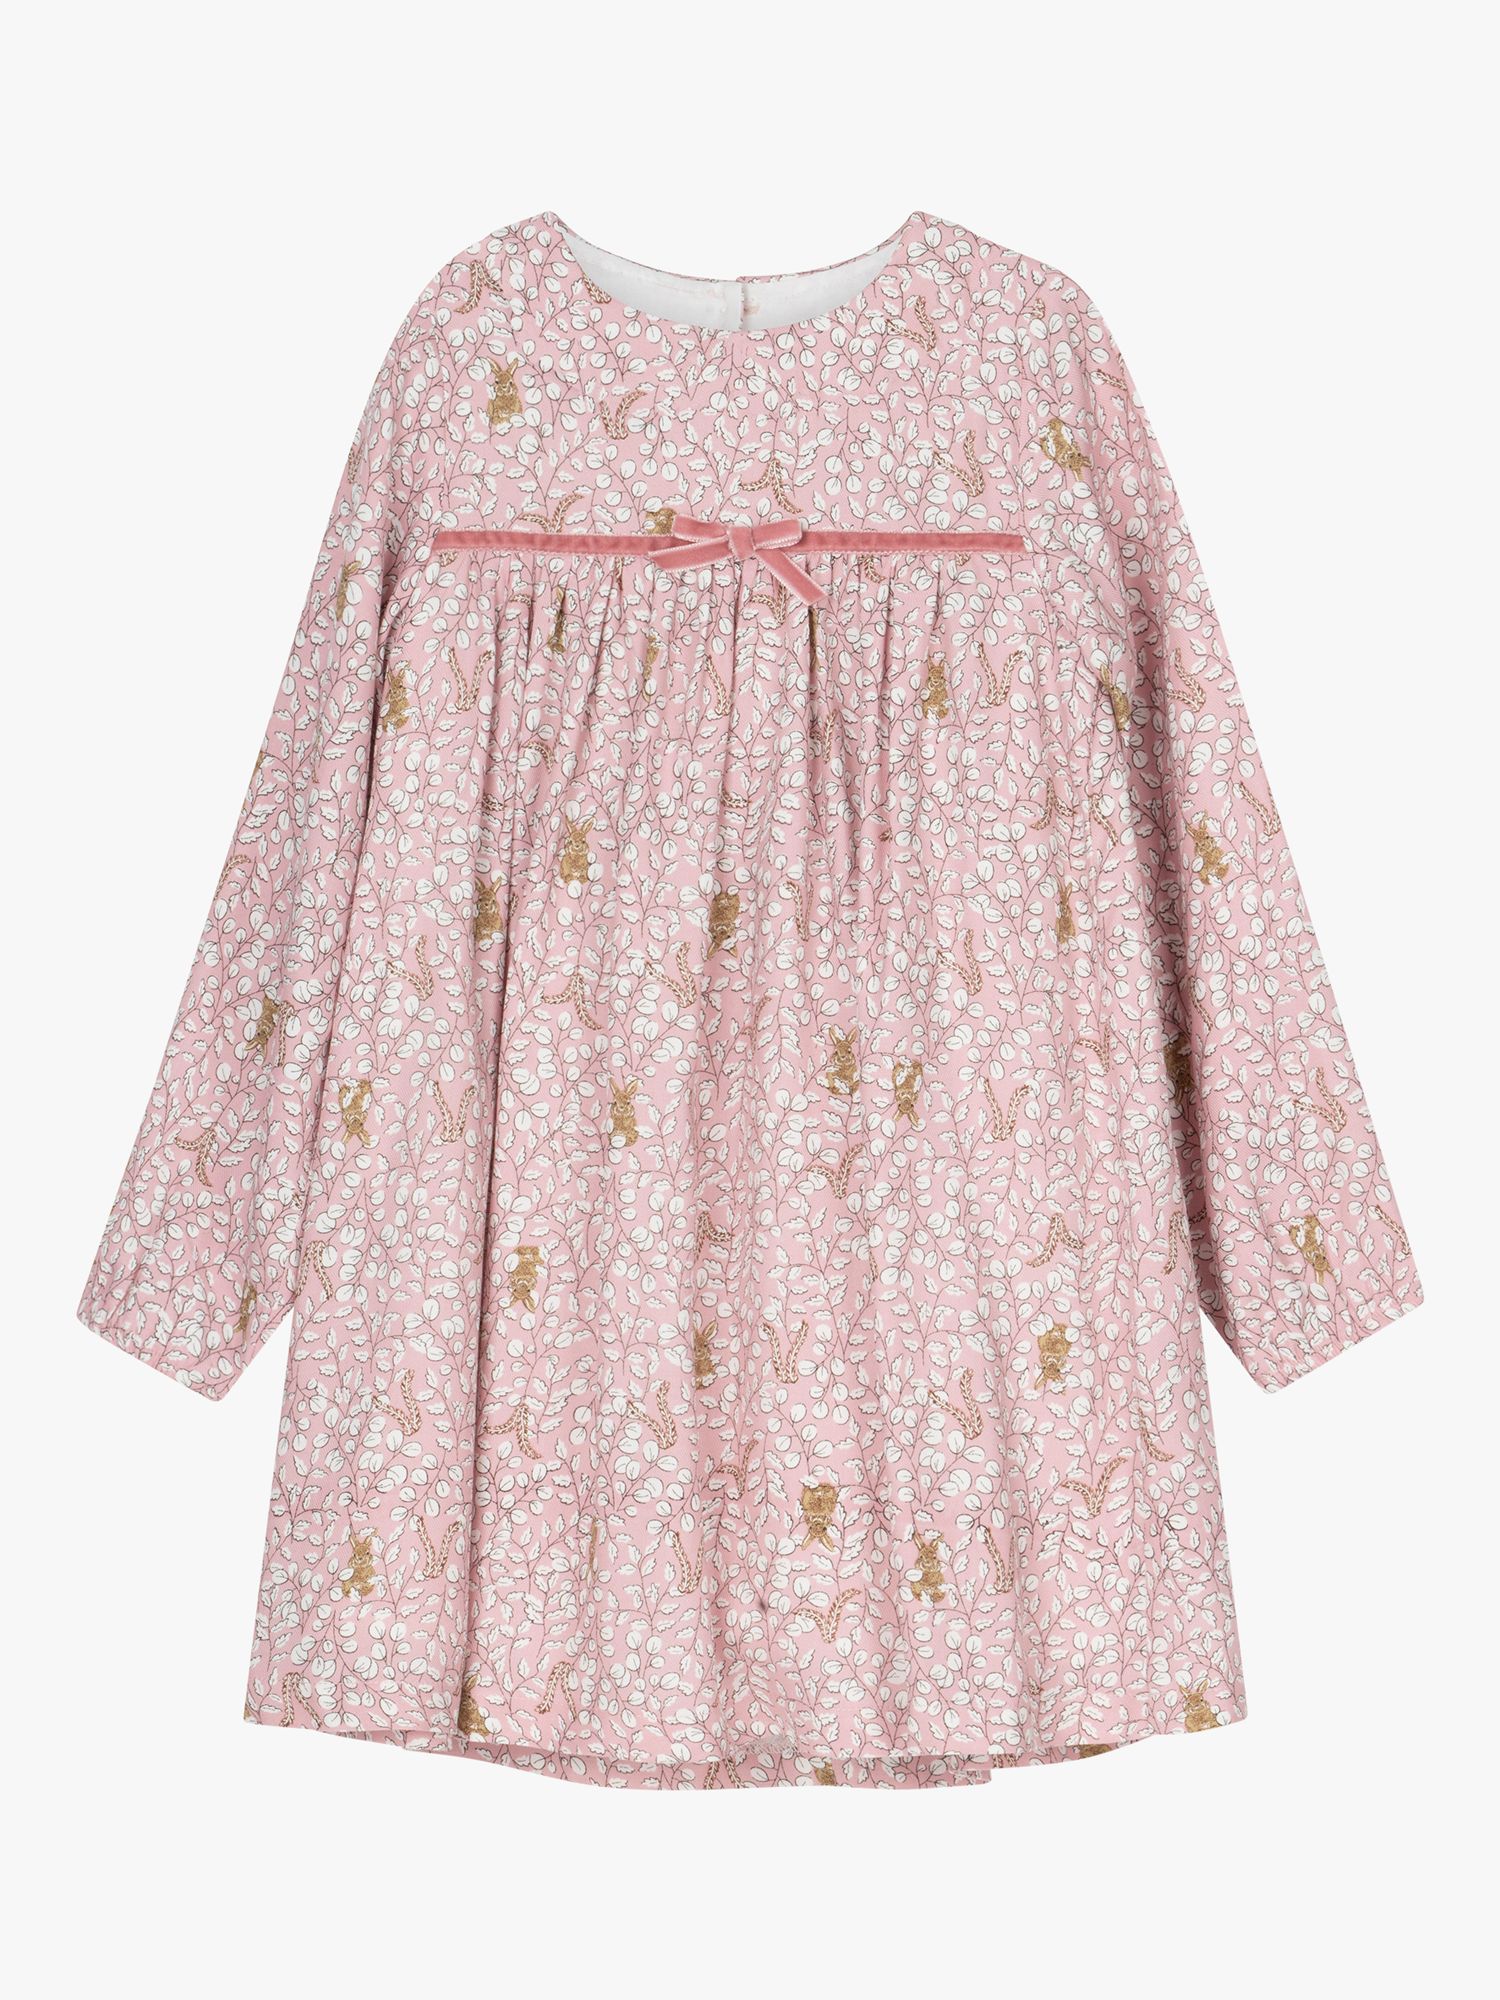 Trotters Kids' Woodland Bunny Smock Dress, Rose Pink, 2 years